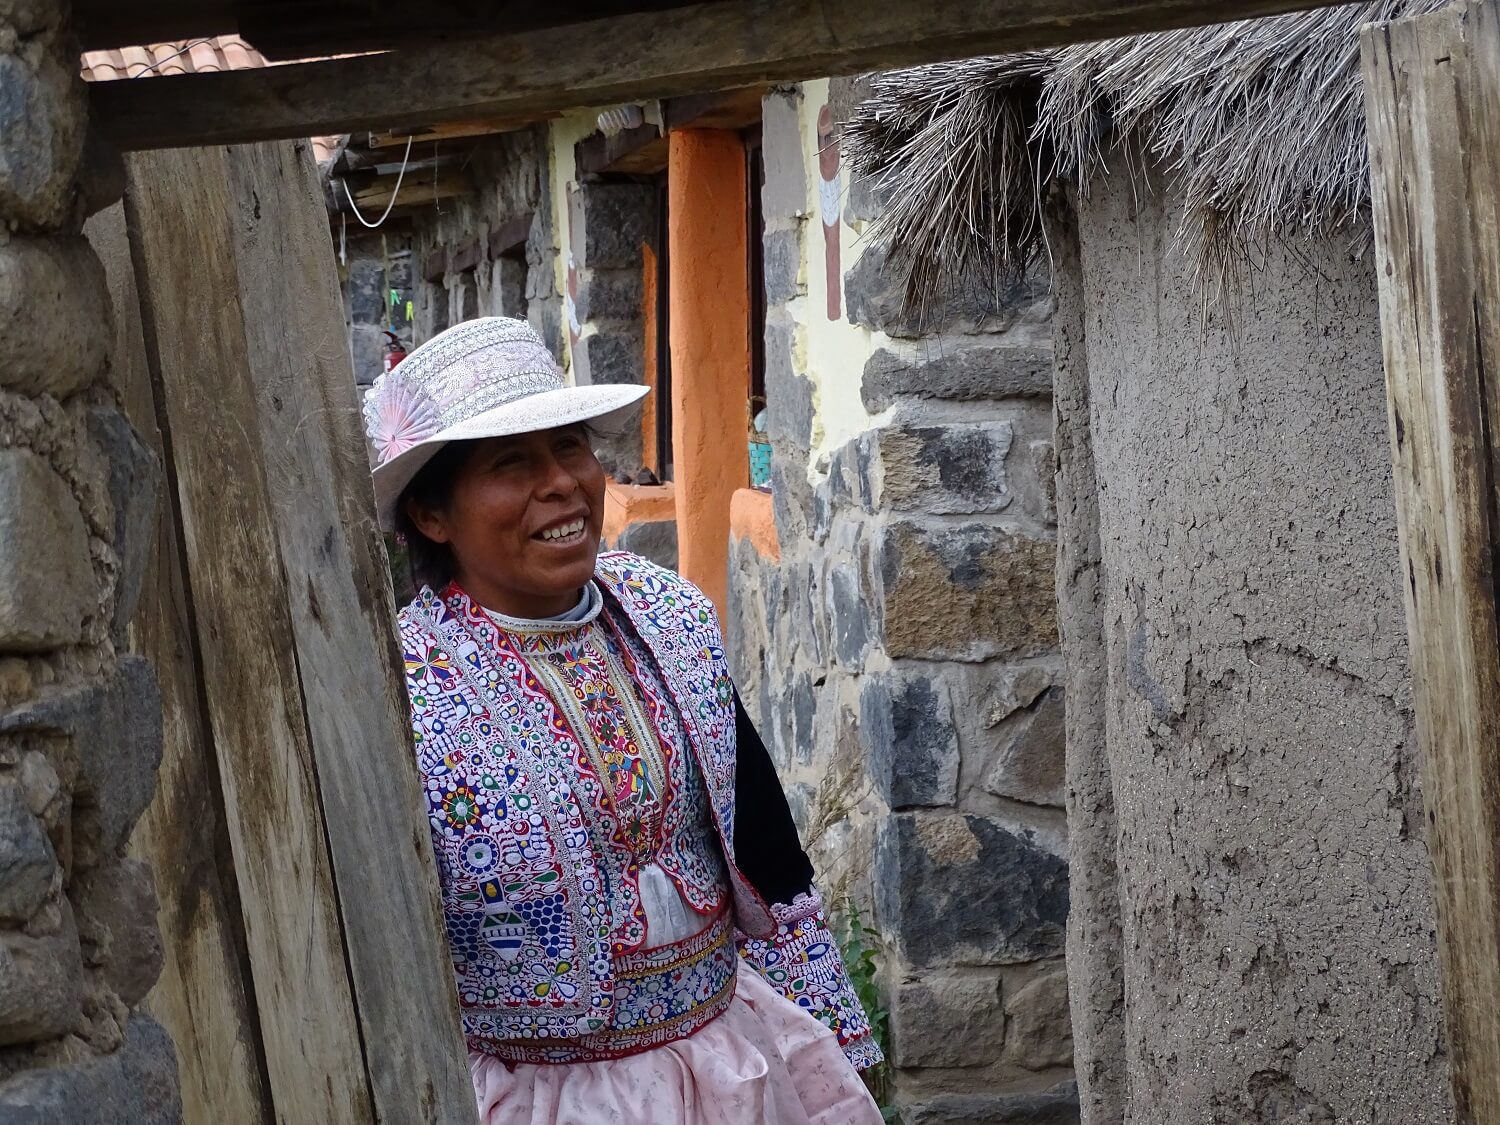 11Local host in Coporaque welcomes visitors to her house with homestay. Colca Canyon - RESPONSible Travel Peru